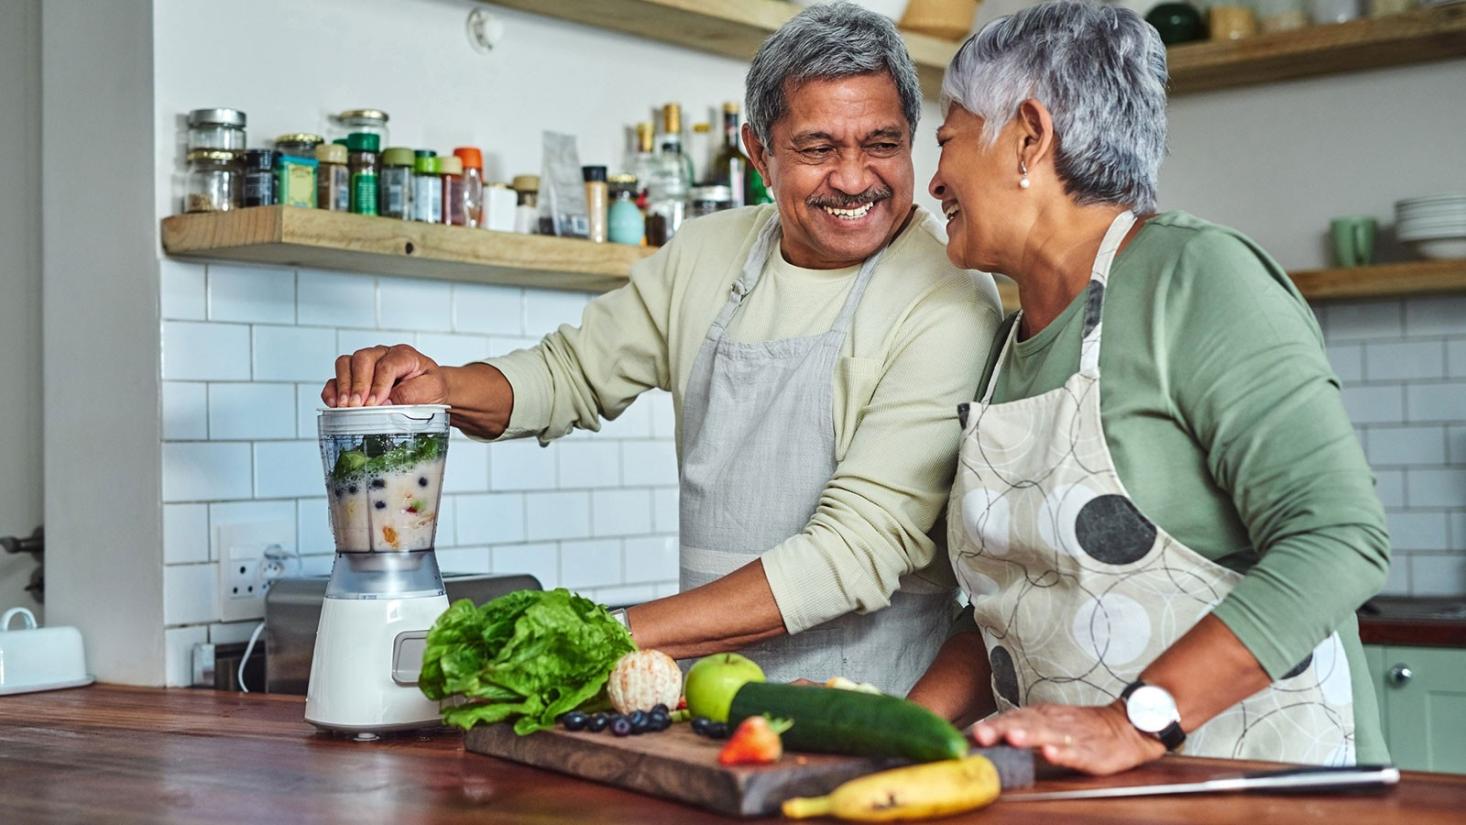 What Are Some Common Nutritional Deficiencies in Seniors and How Can I Avoid Them?